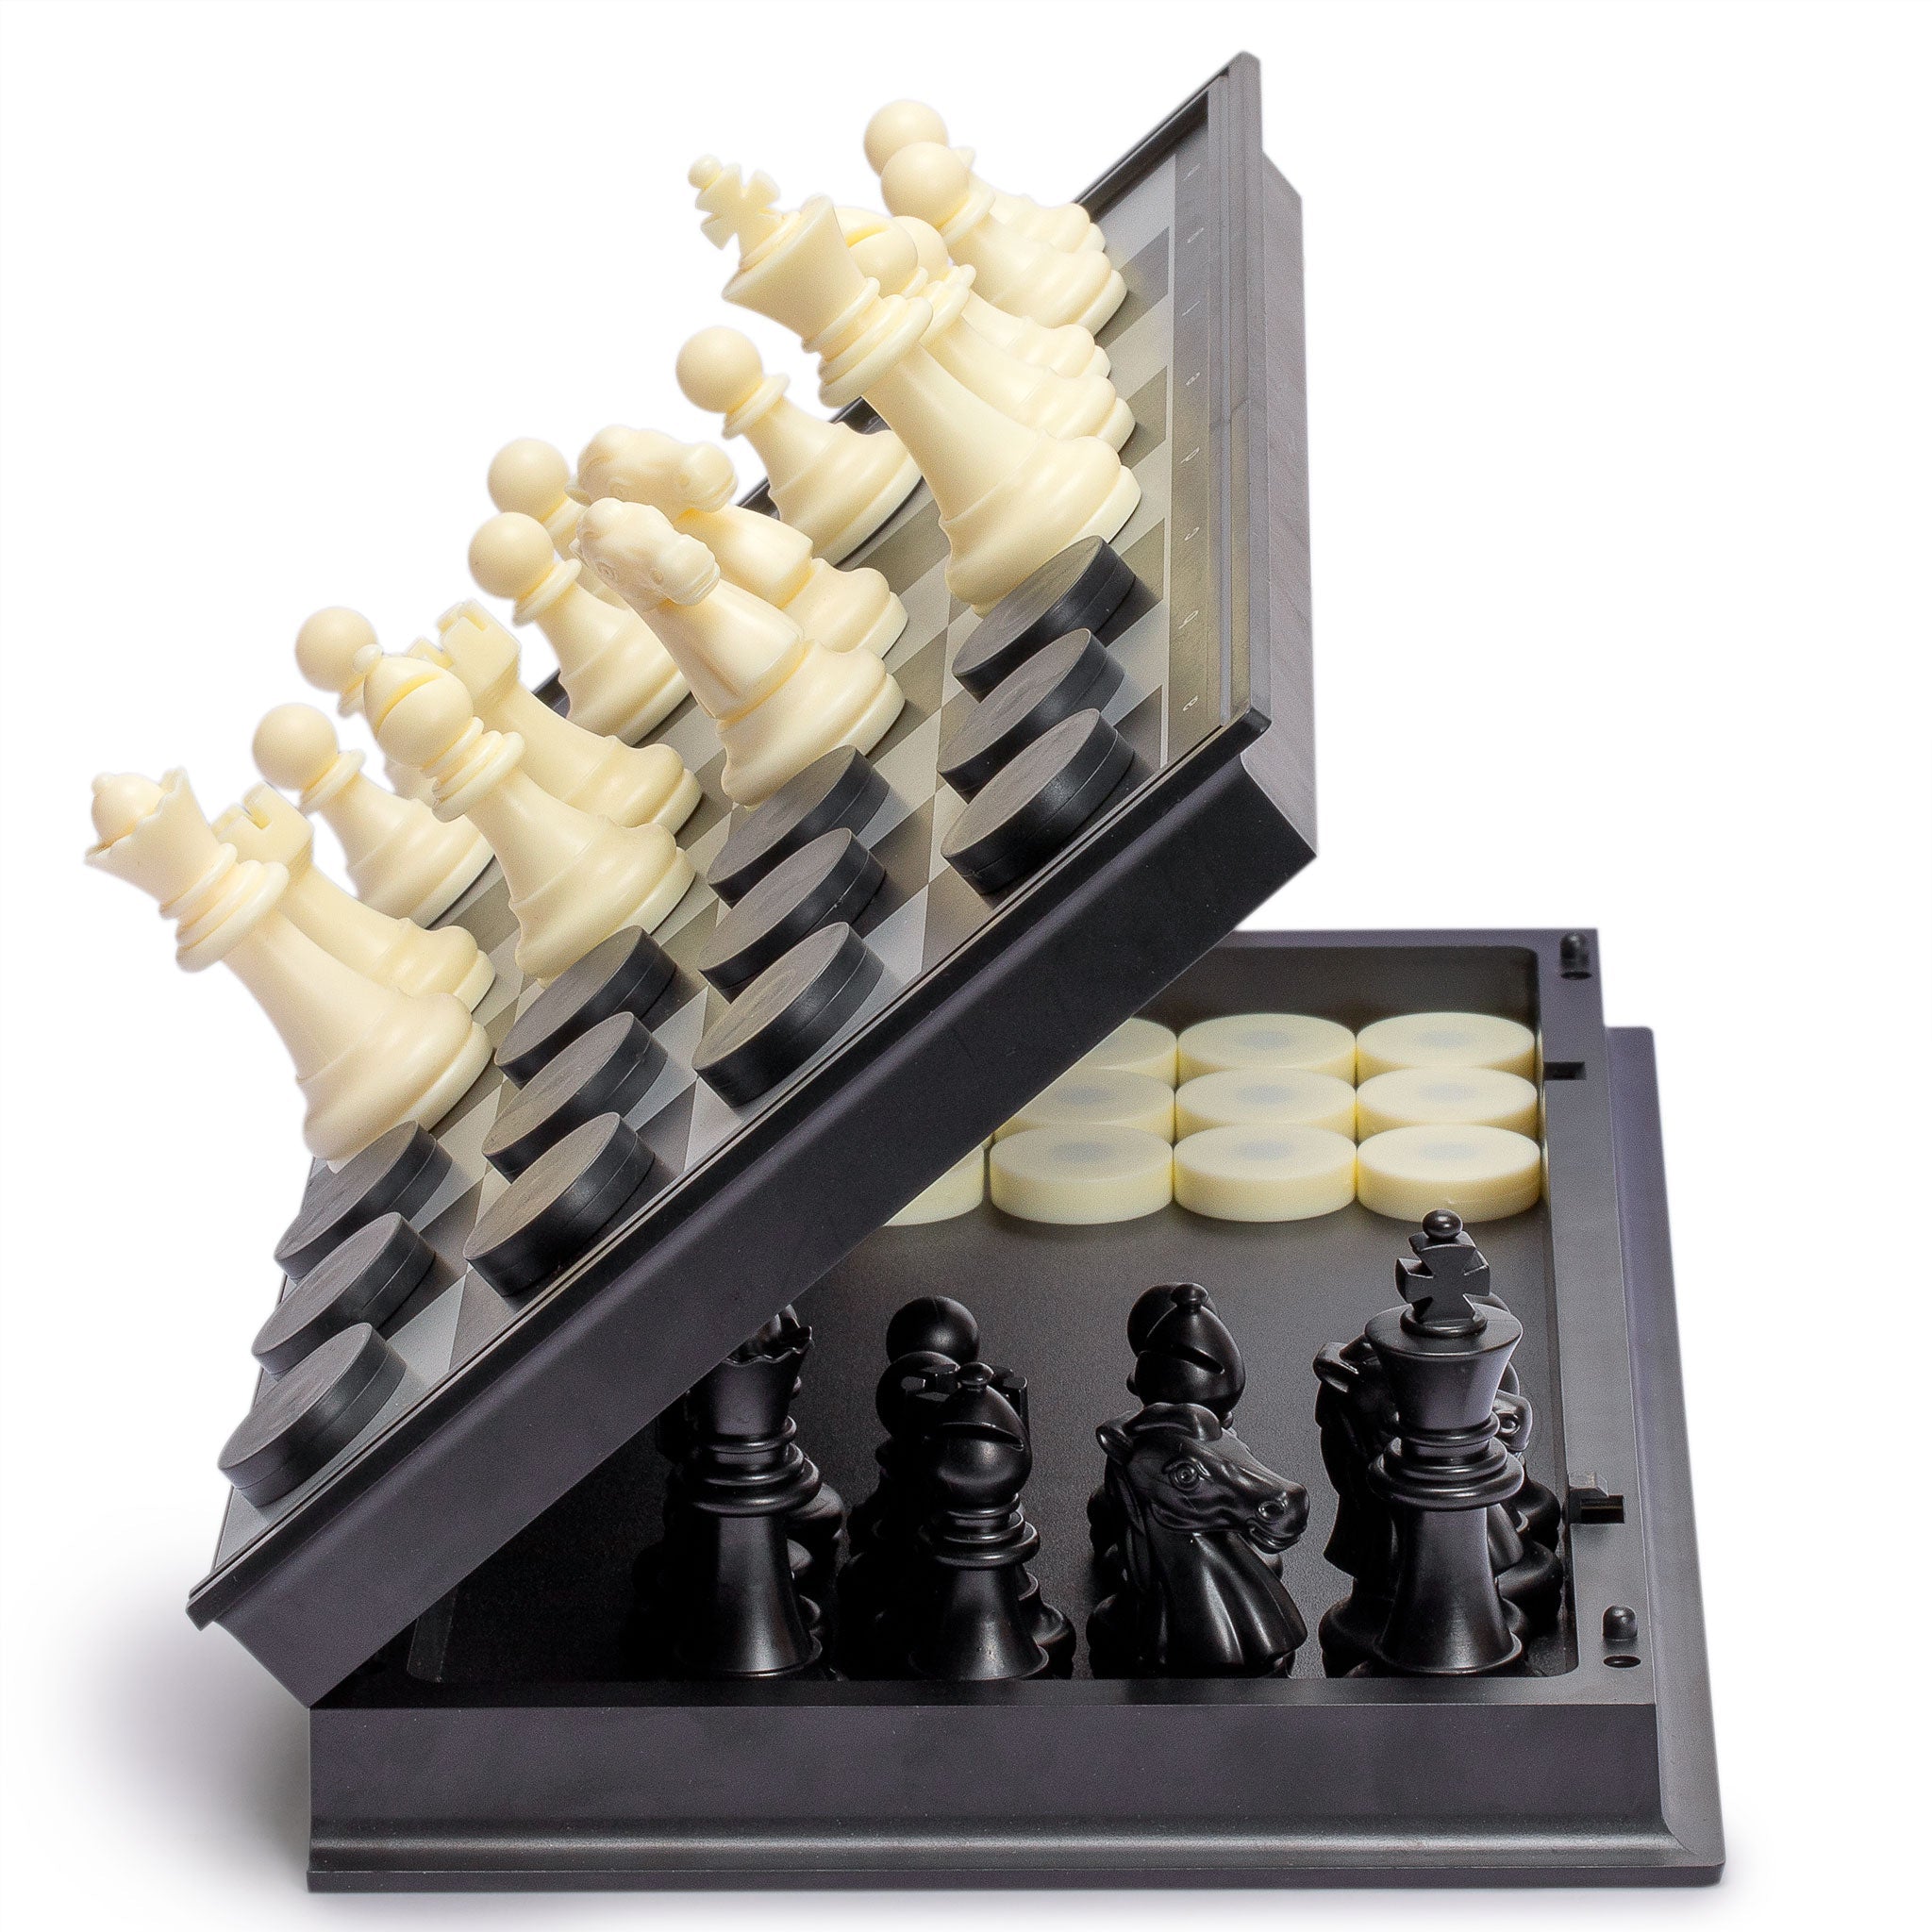  2 Sets Chess Pieces Chess Pawns Tournament Chess Set for Chess  Board Game, Pieces Only and No Board, White and Black : Toys & Games